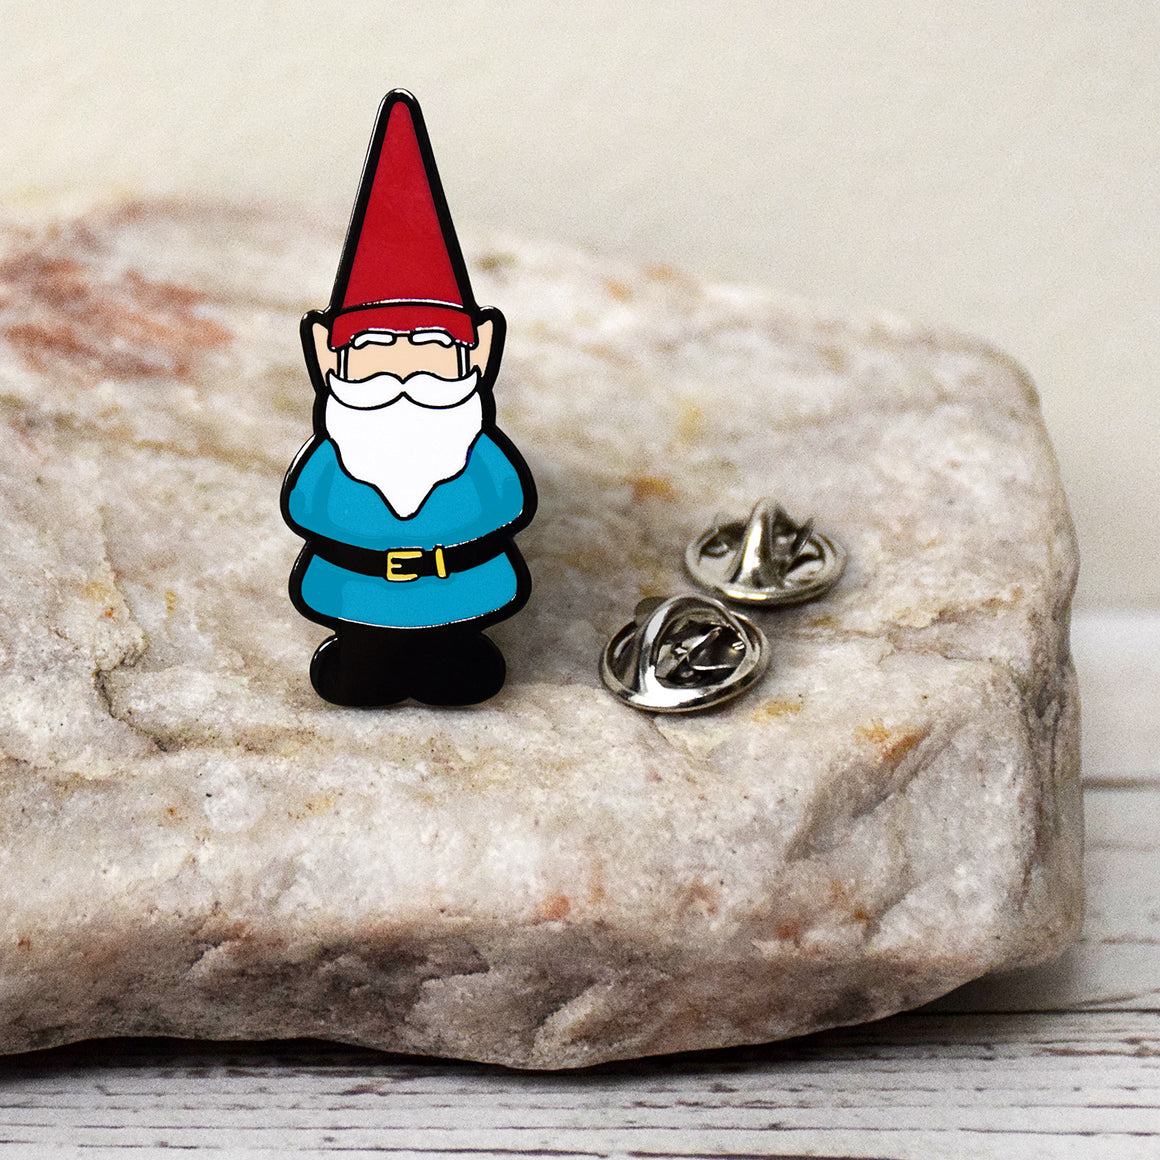 Relax and Enjoy The Little Things - Garden Gnome Enamel Pin